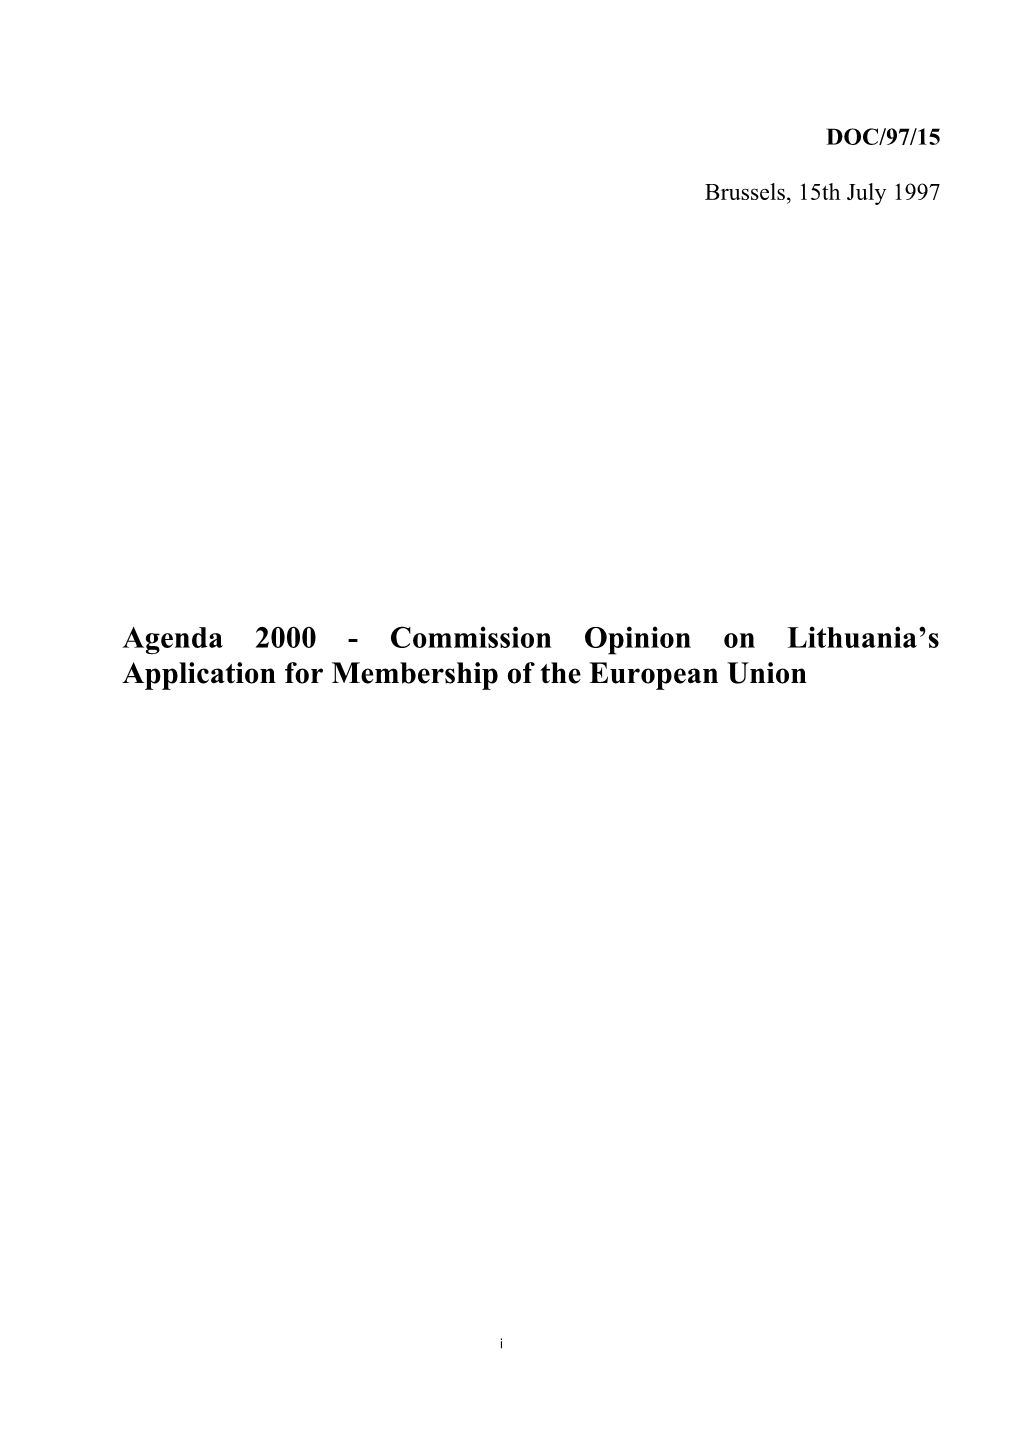 Agenda 2000 - Commission Opinion on Lithuania S Application for Membership of the European